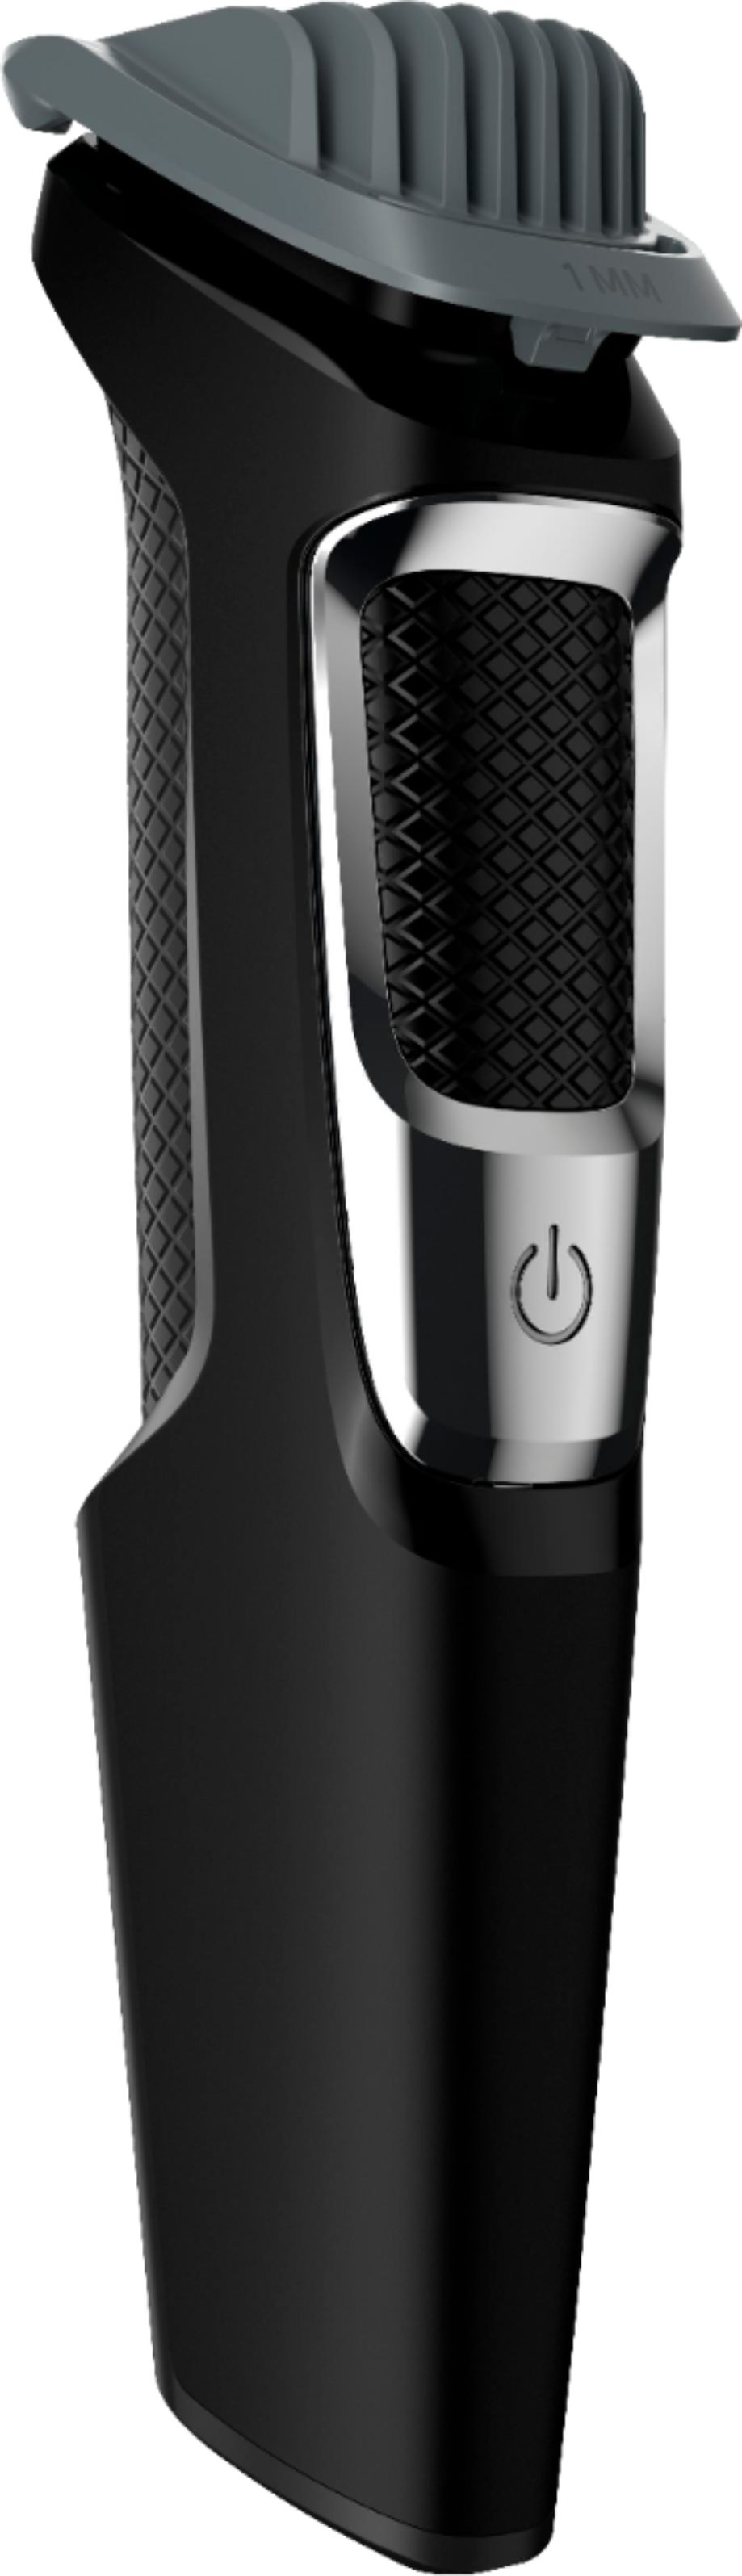 Philips Norelco Multigroom 3000 Best Beard, Buy Trimmer Ear Moustache, Black/silver and MG3750/60 - Nose